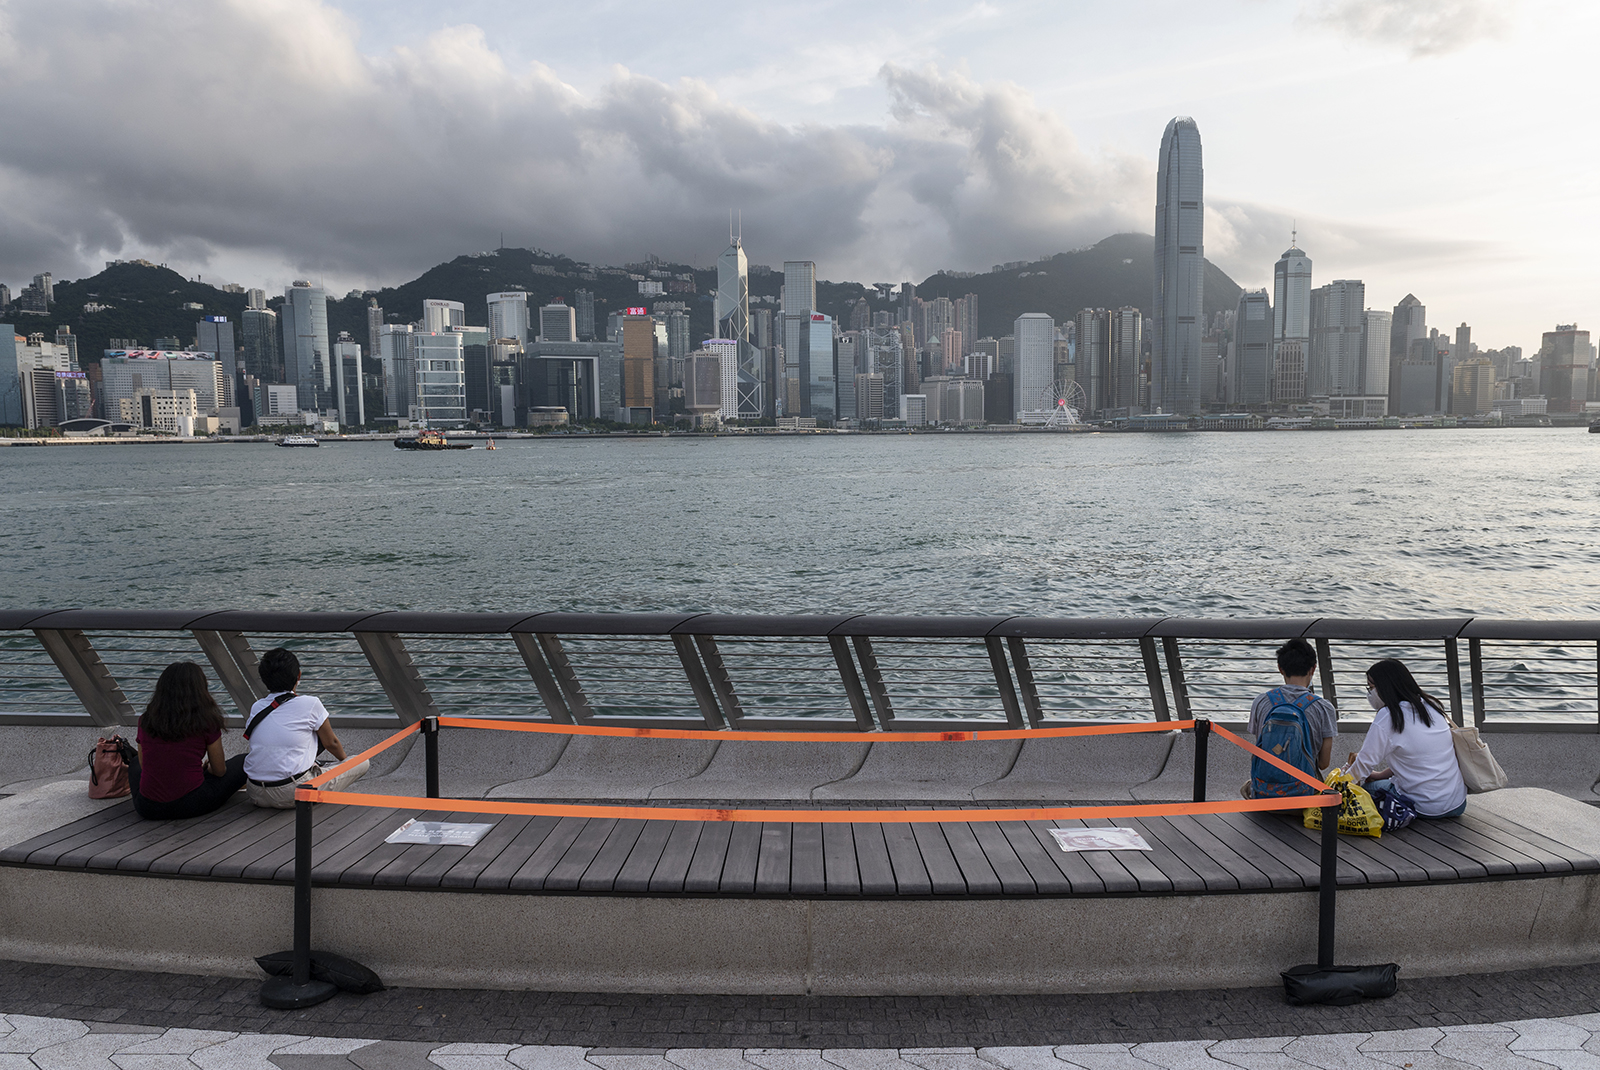 Couples sit and enjoy the view of he Victoria harbor as public benches are seen with orange tape to block access to them in Tsim Sha Tsui, Hong Kong, China, on August 24.